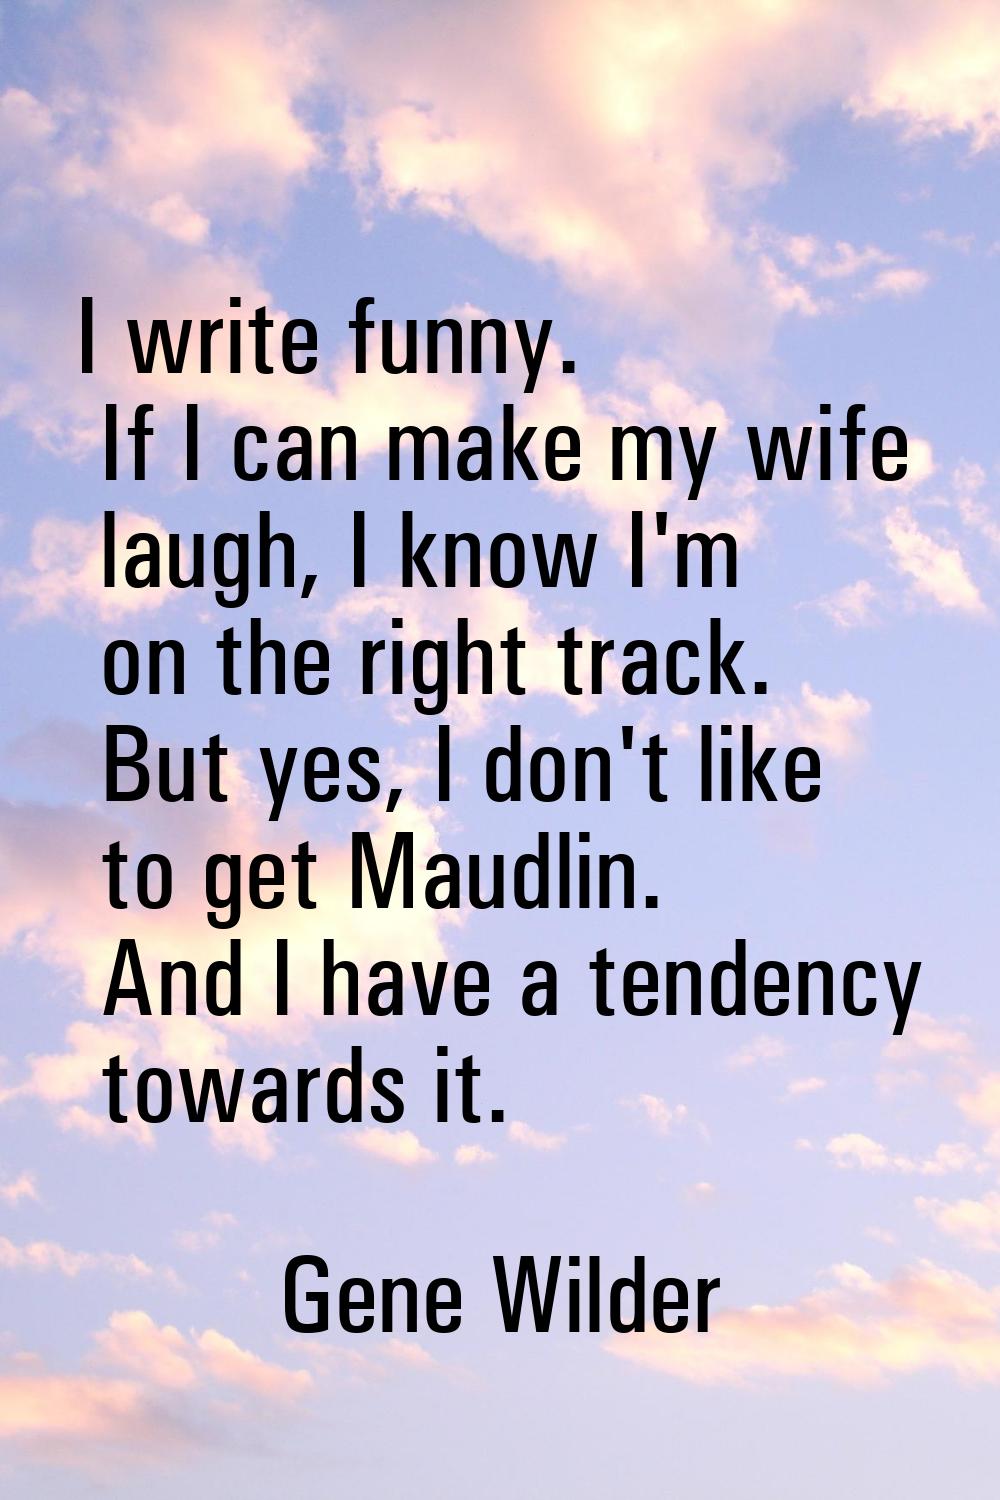 I write funny. If I can make my wife laugh, I know I'm on the right track. But yes, I don't like to